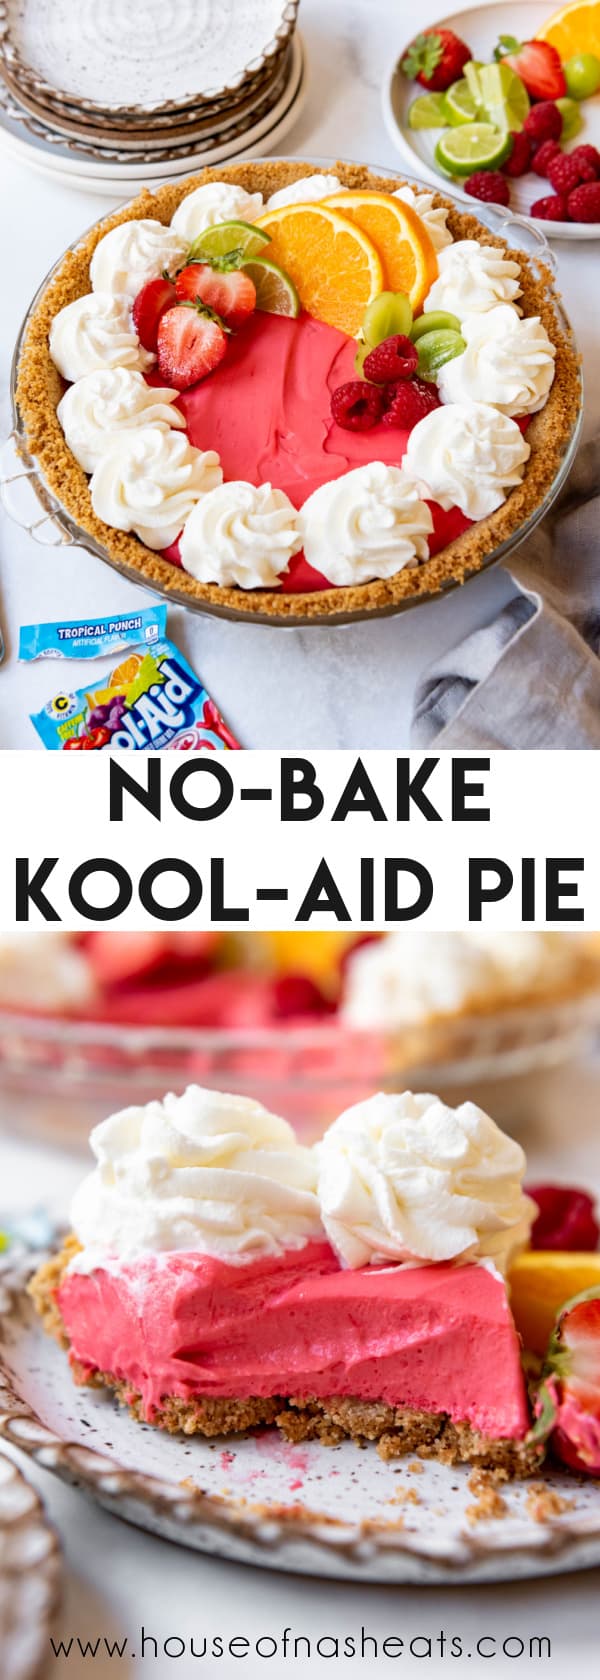 A collage of images of Kool-Aid pie with text overlay.